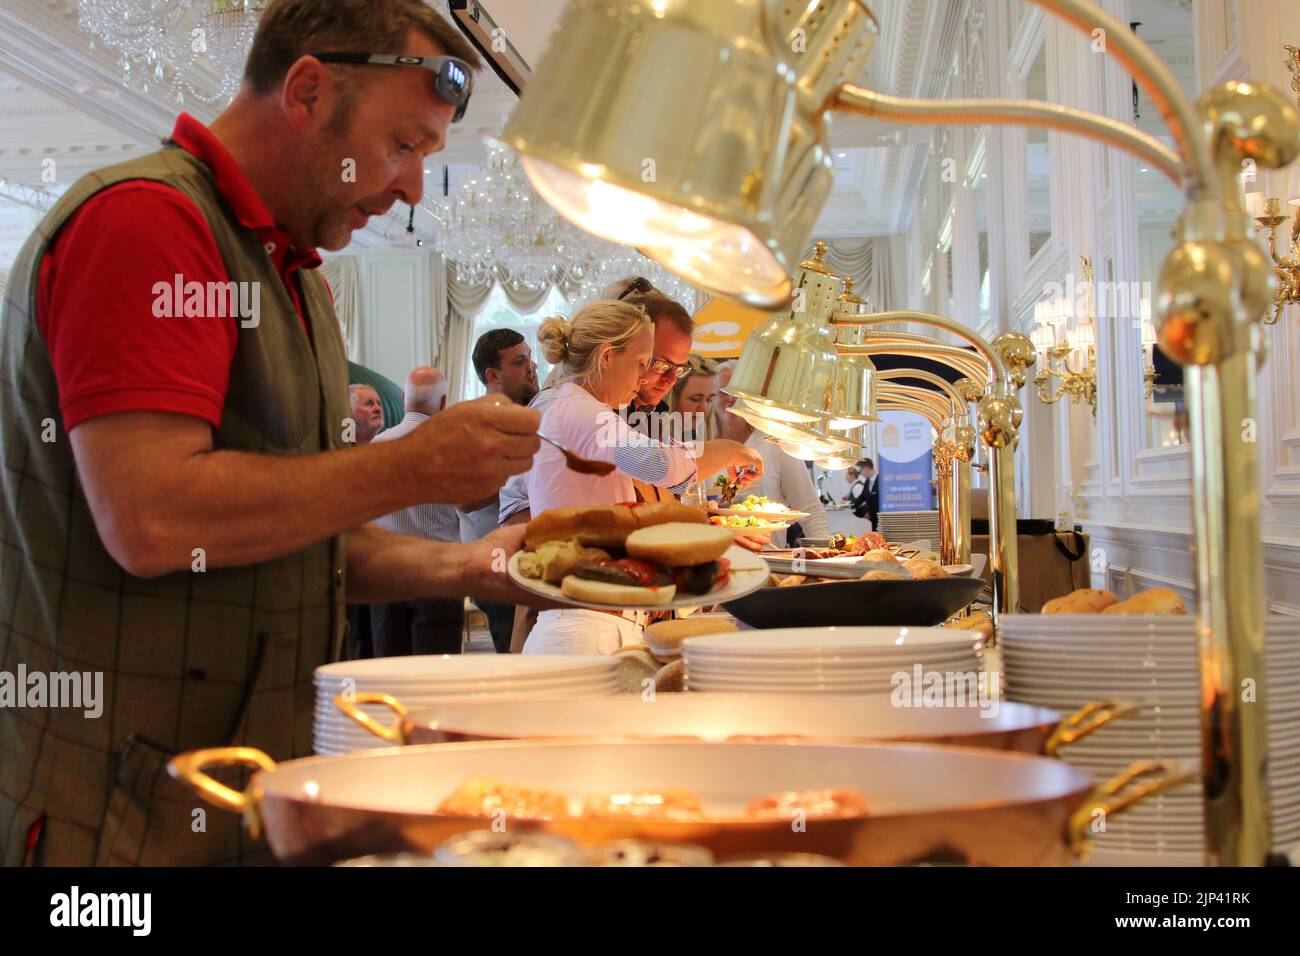 Trump Turnberry Hotel, Ayrshire, Scotland, UK. Diners at a corporate event select food kept warm under heat lamps Stock Photo